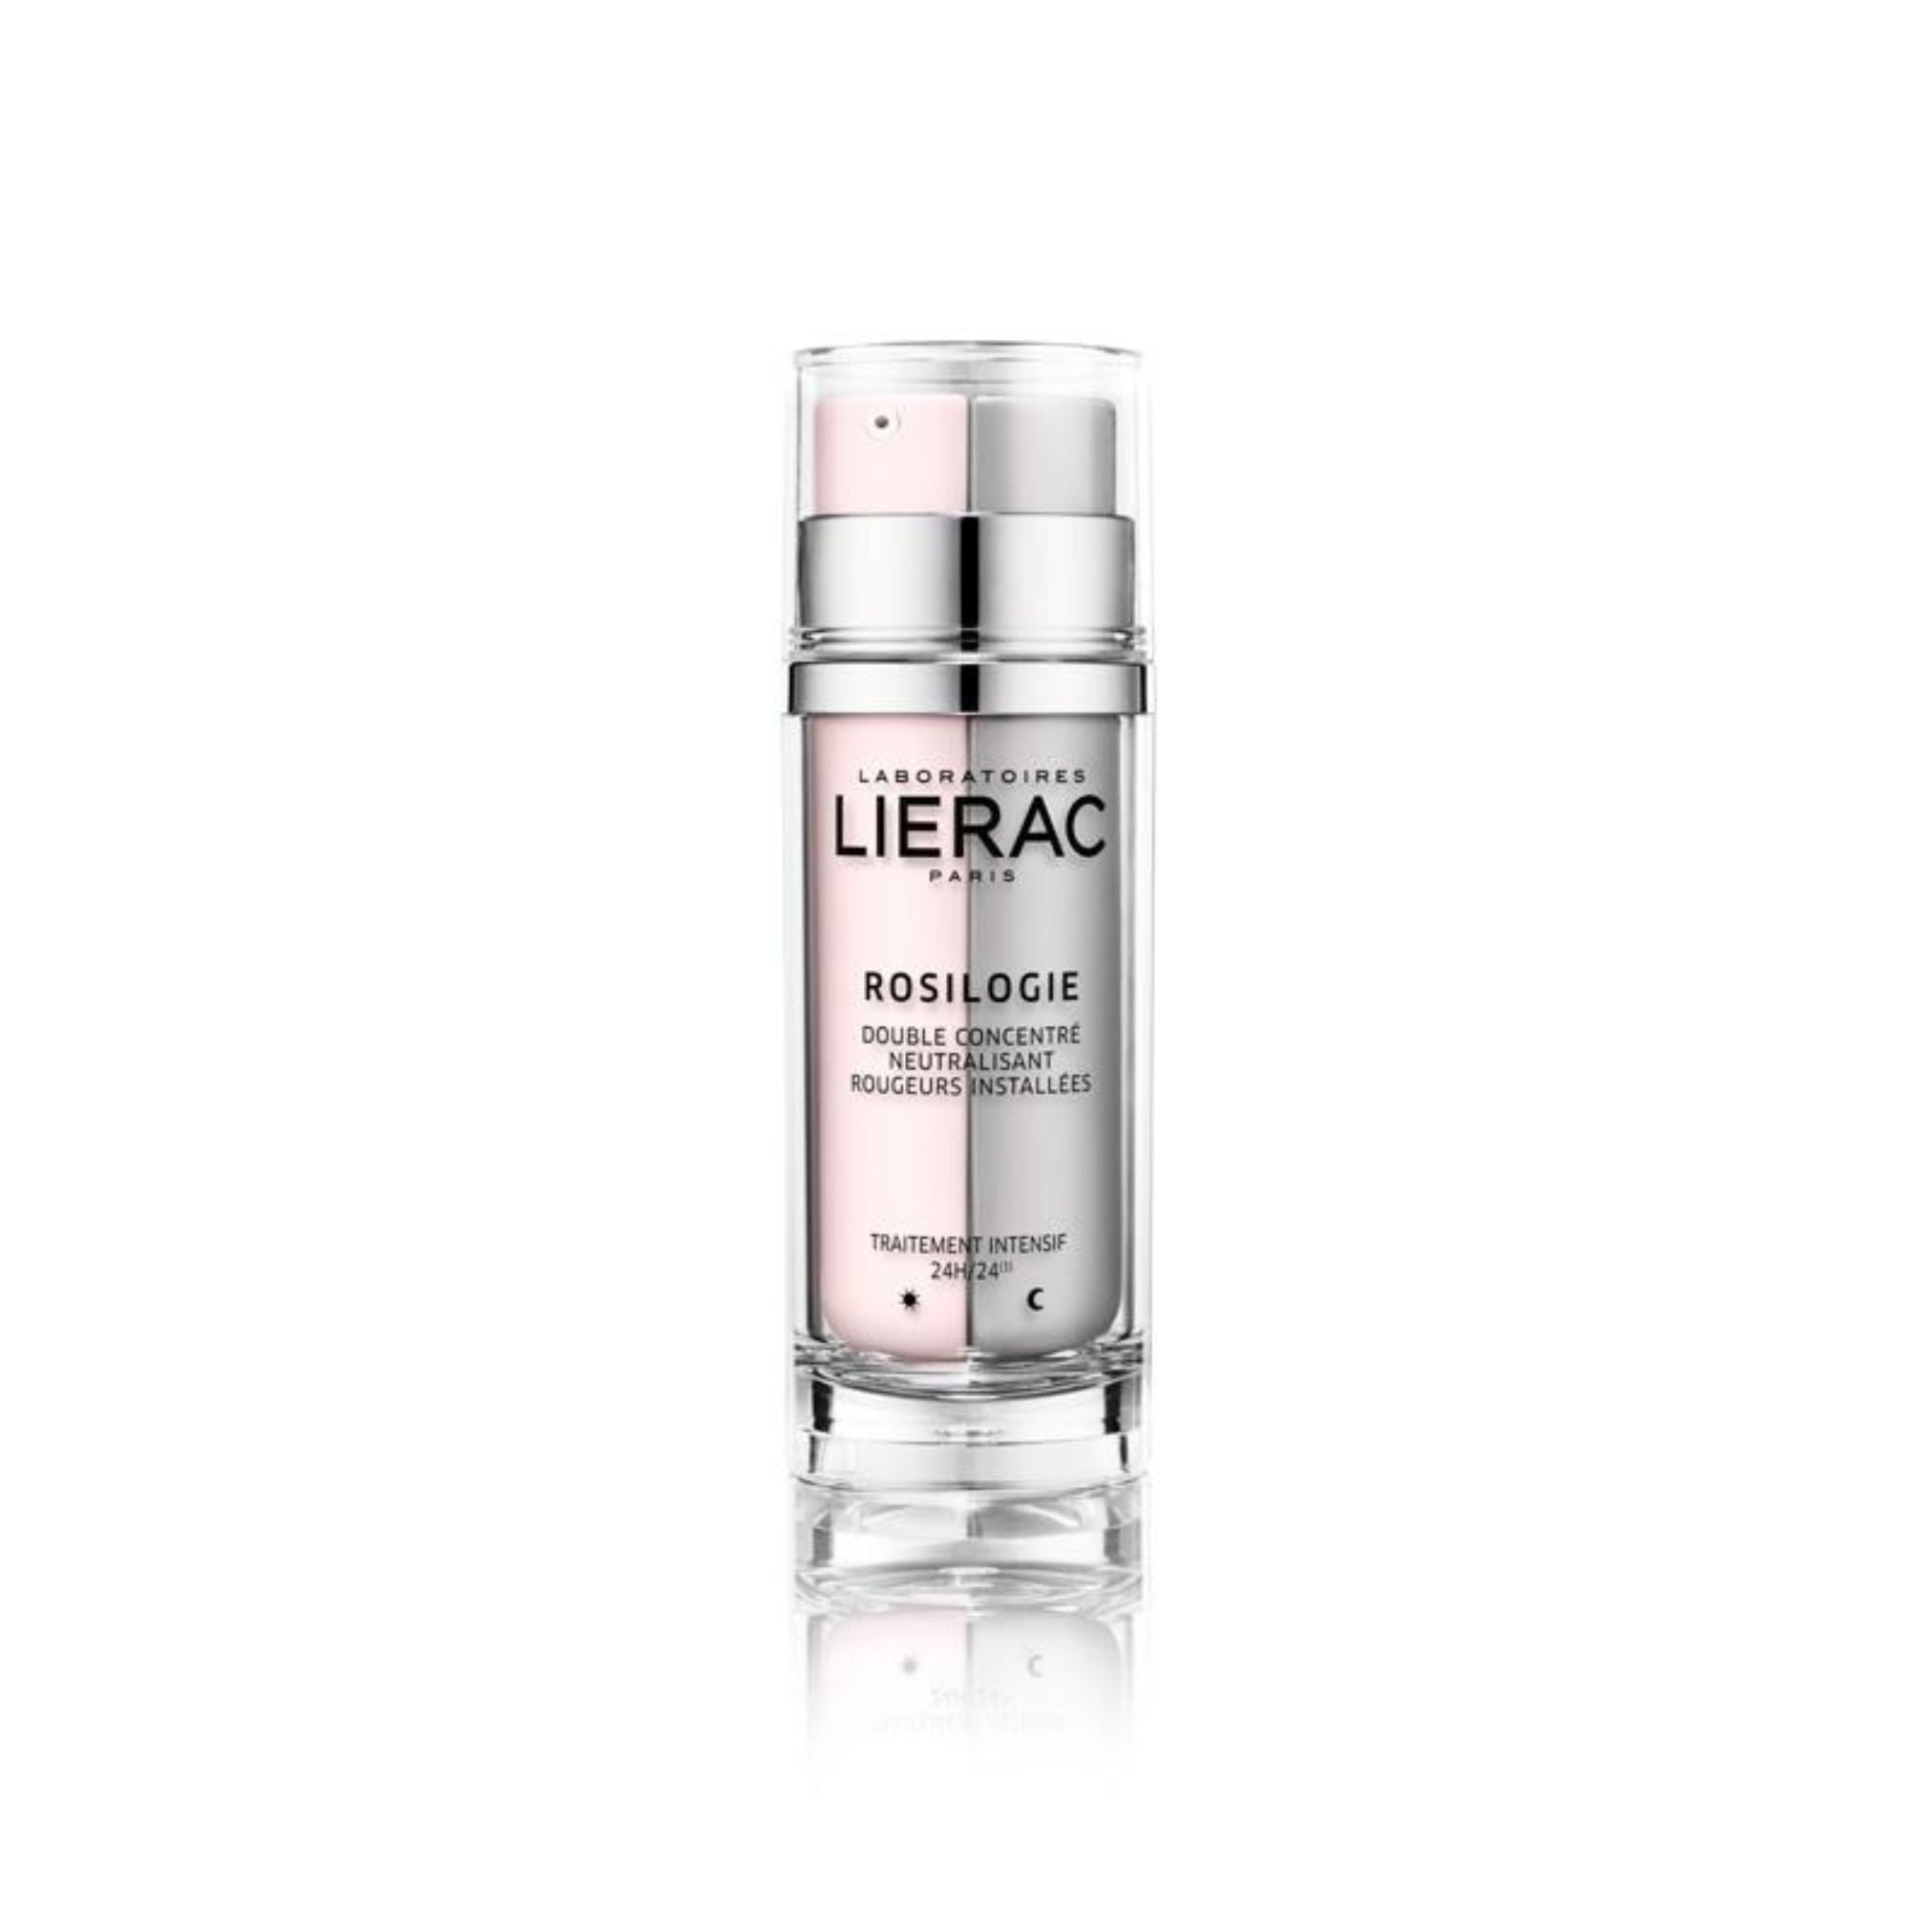 Lierac Rosilogie Double Concentrate Redness Neutralizer 30ml